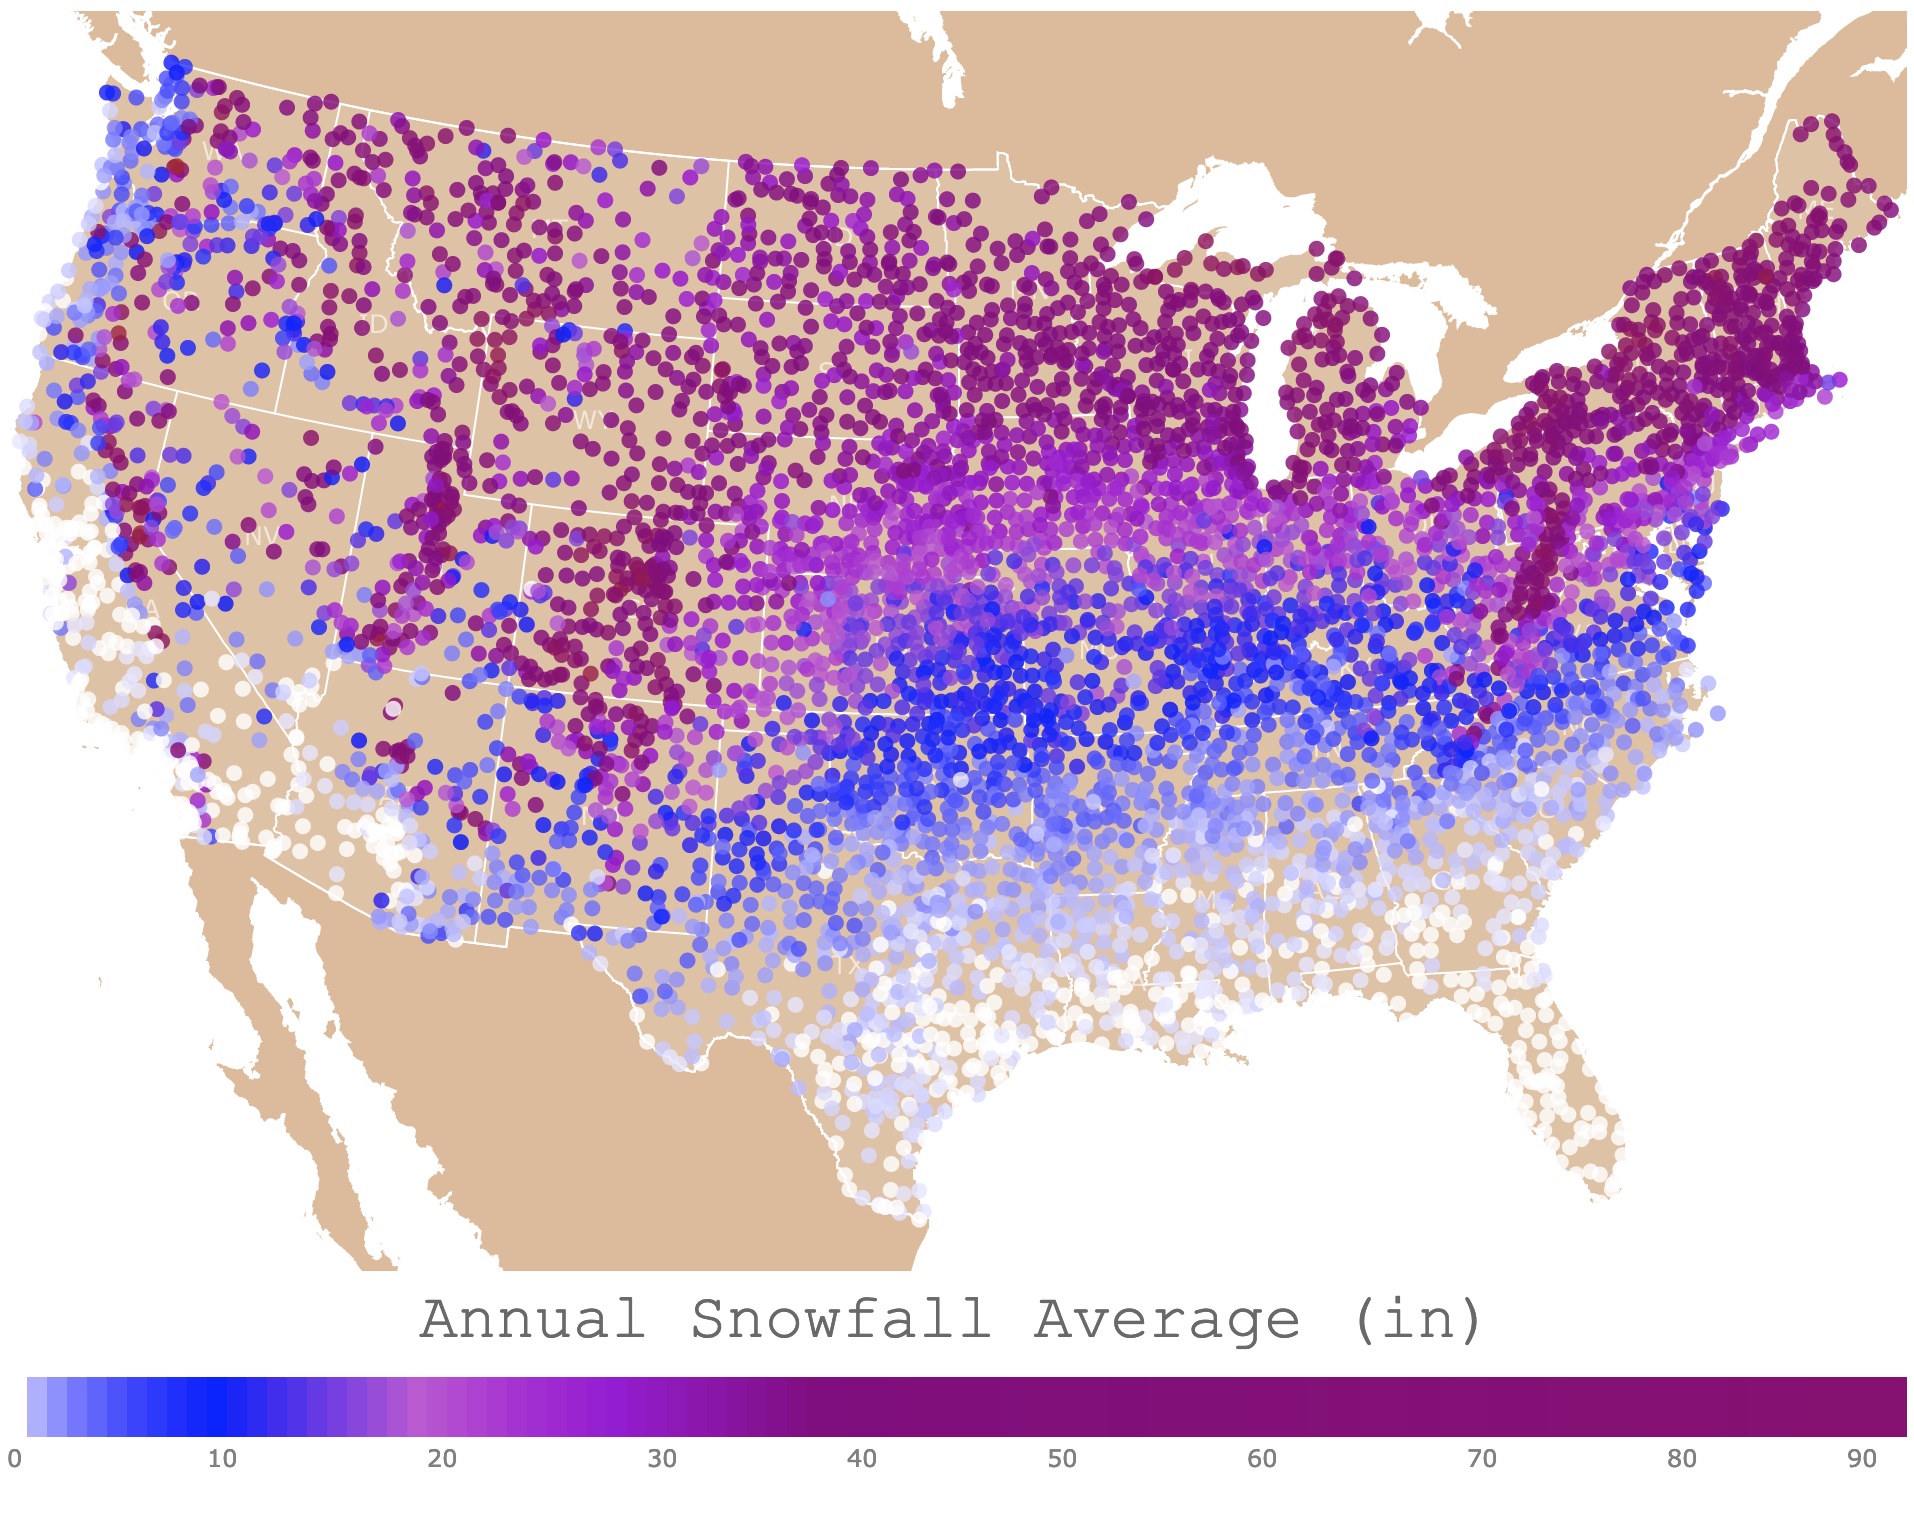 Map of annual snowfall average in the U.S.A. 